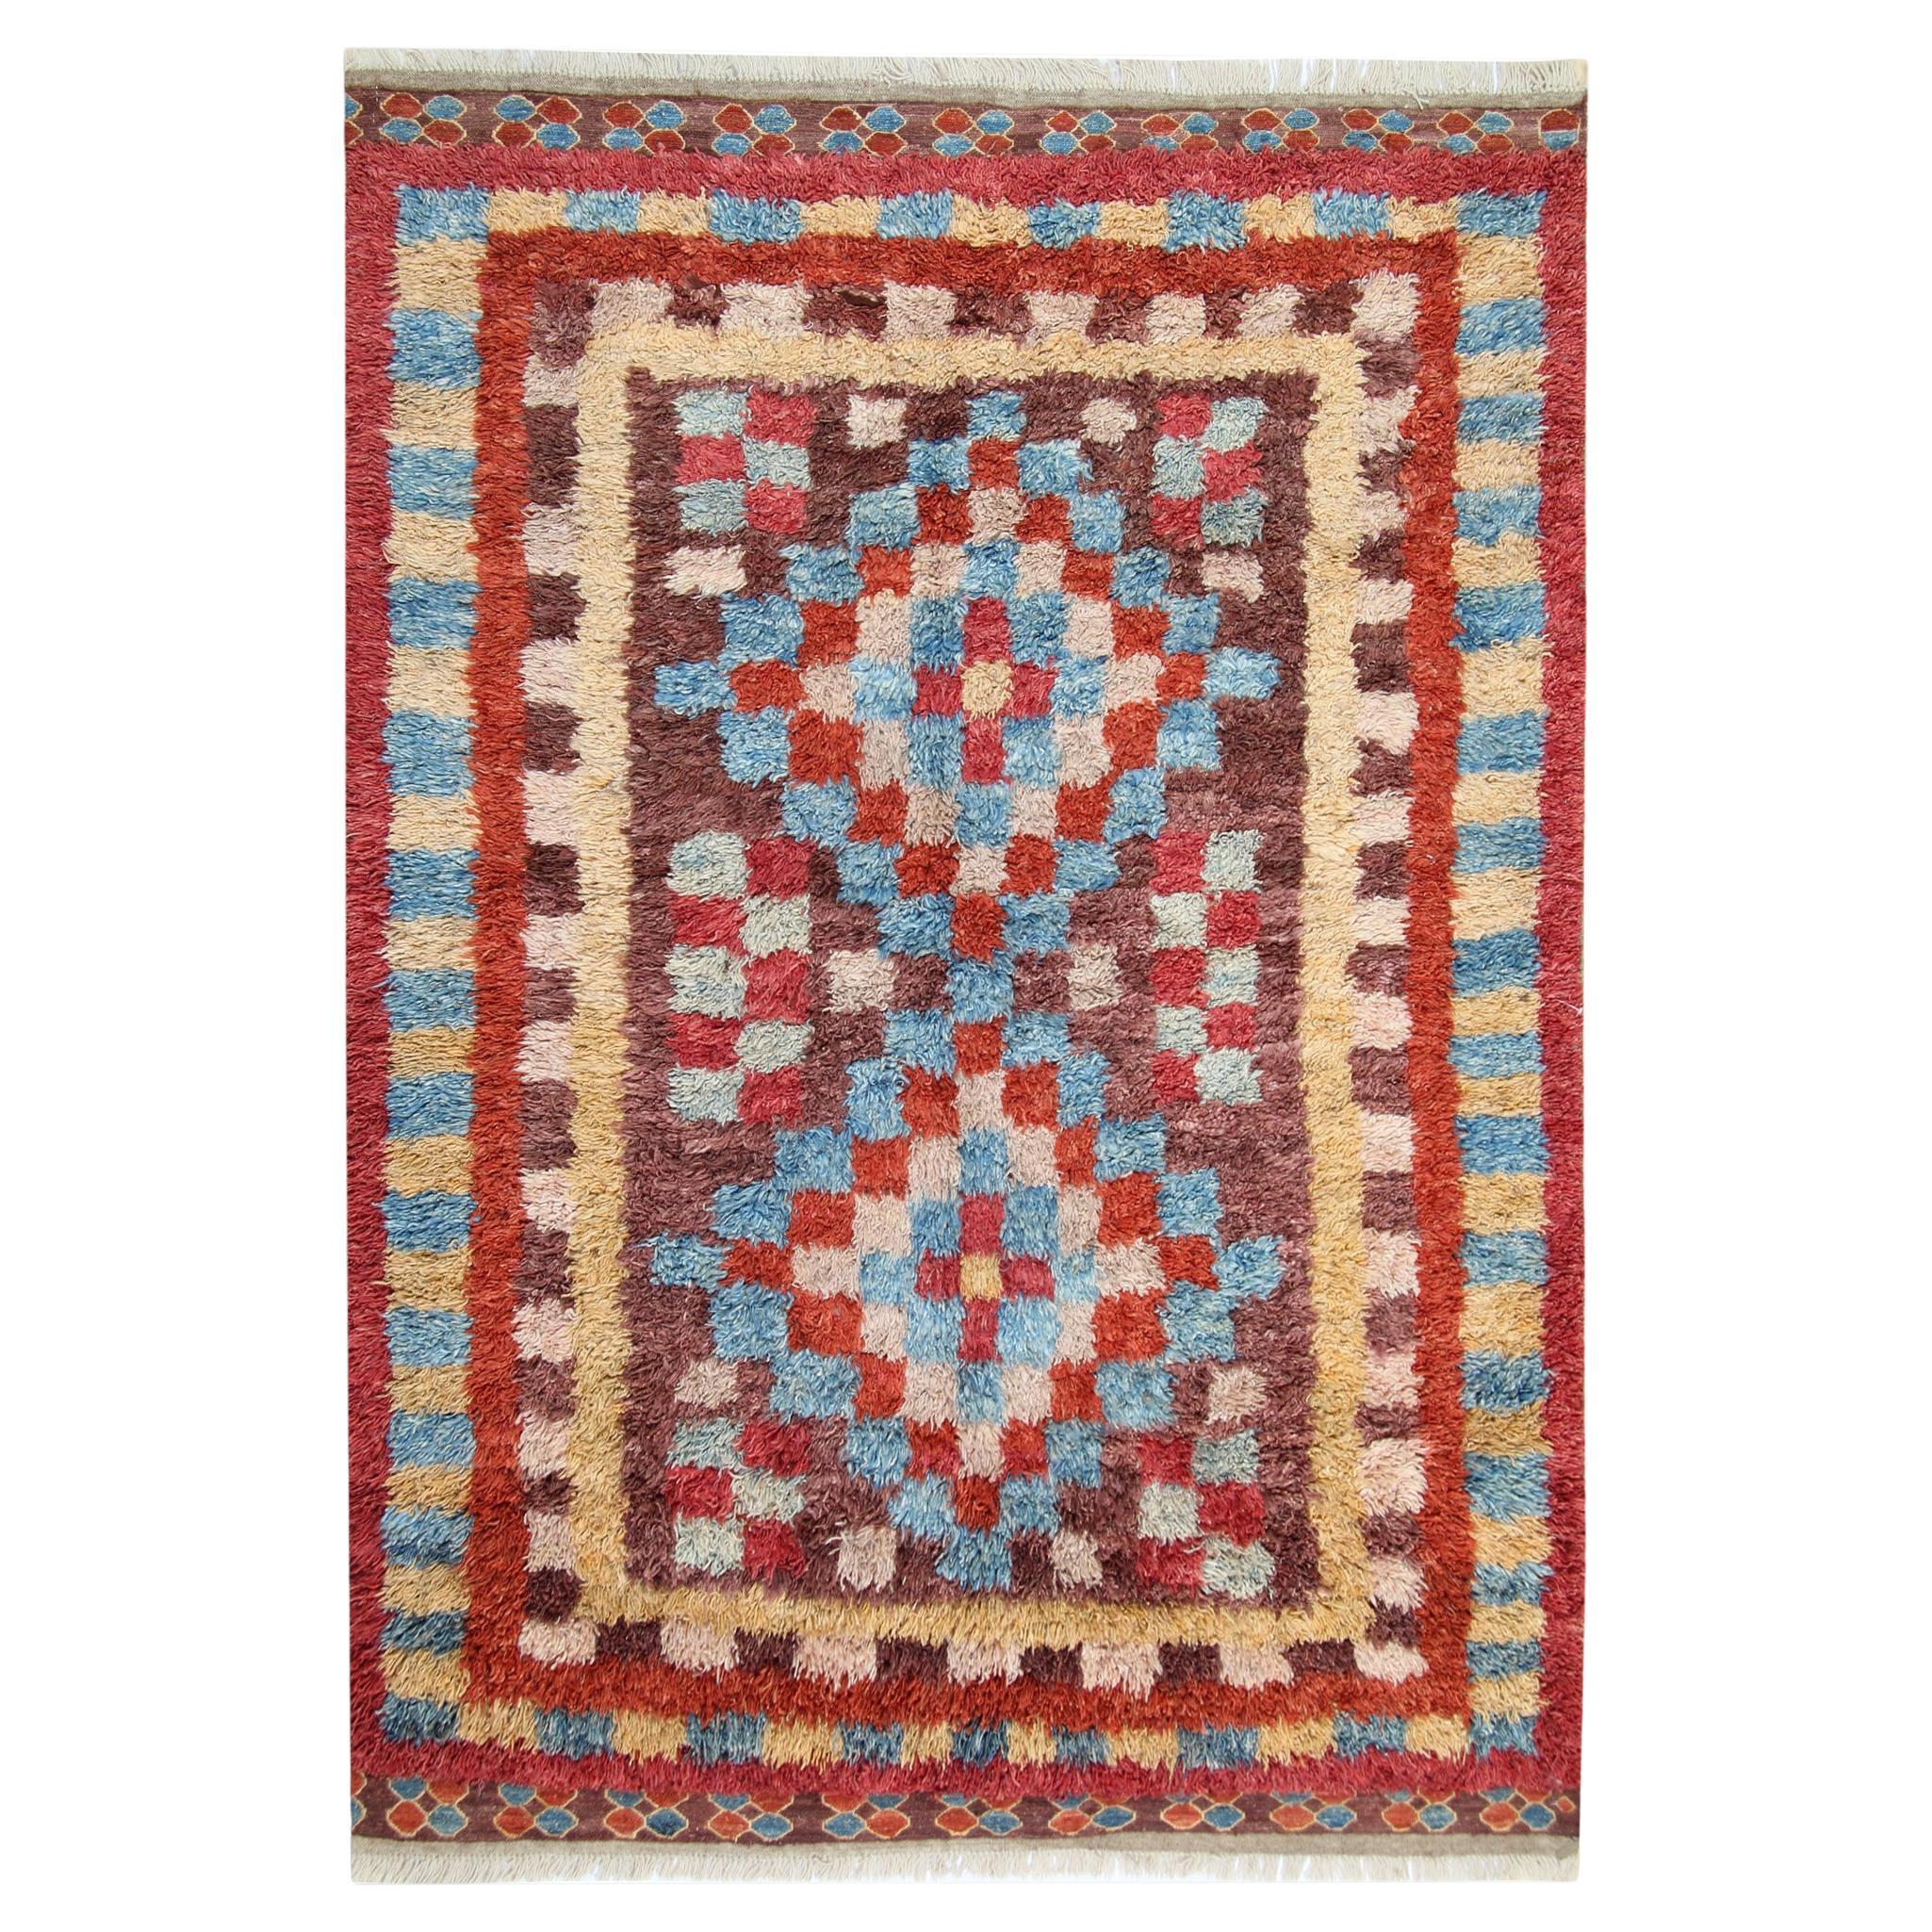 Handmade Carpet Moroccan Rugs, Shag Rugs, Pink and Red Primitive Carpet for Sale For Sale